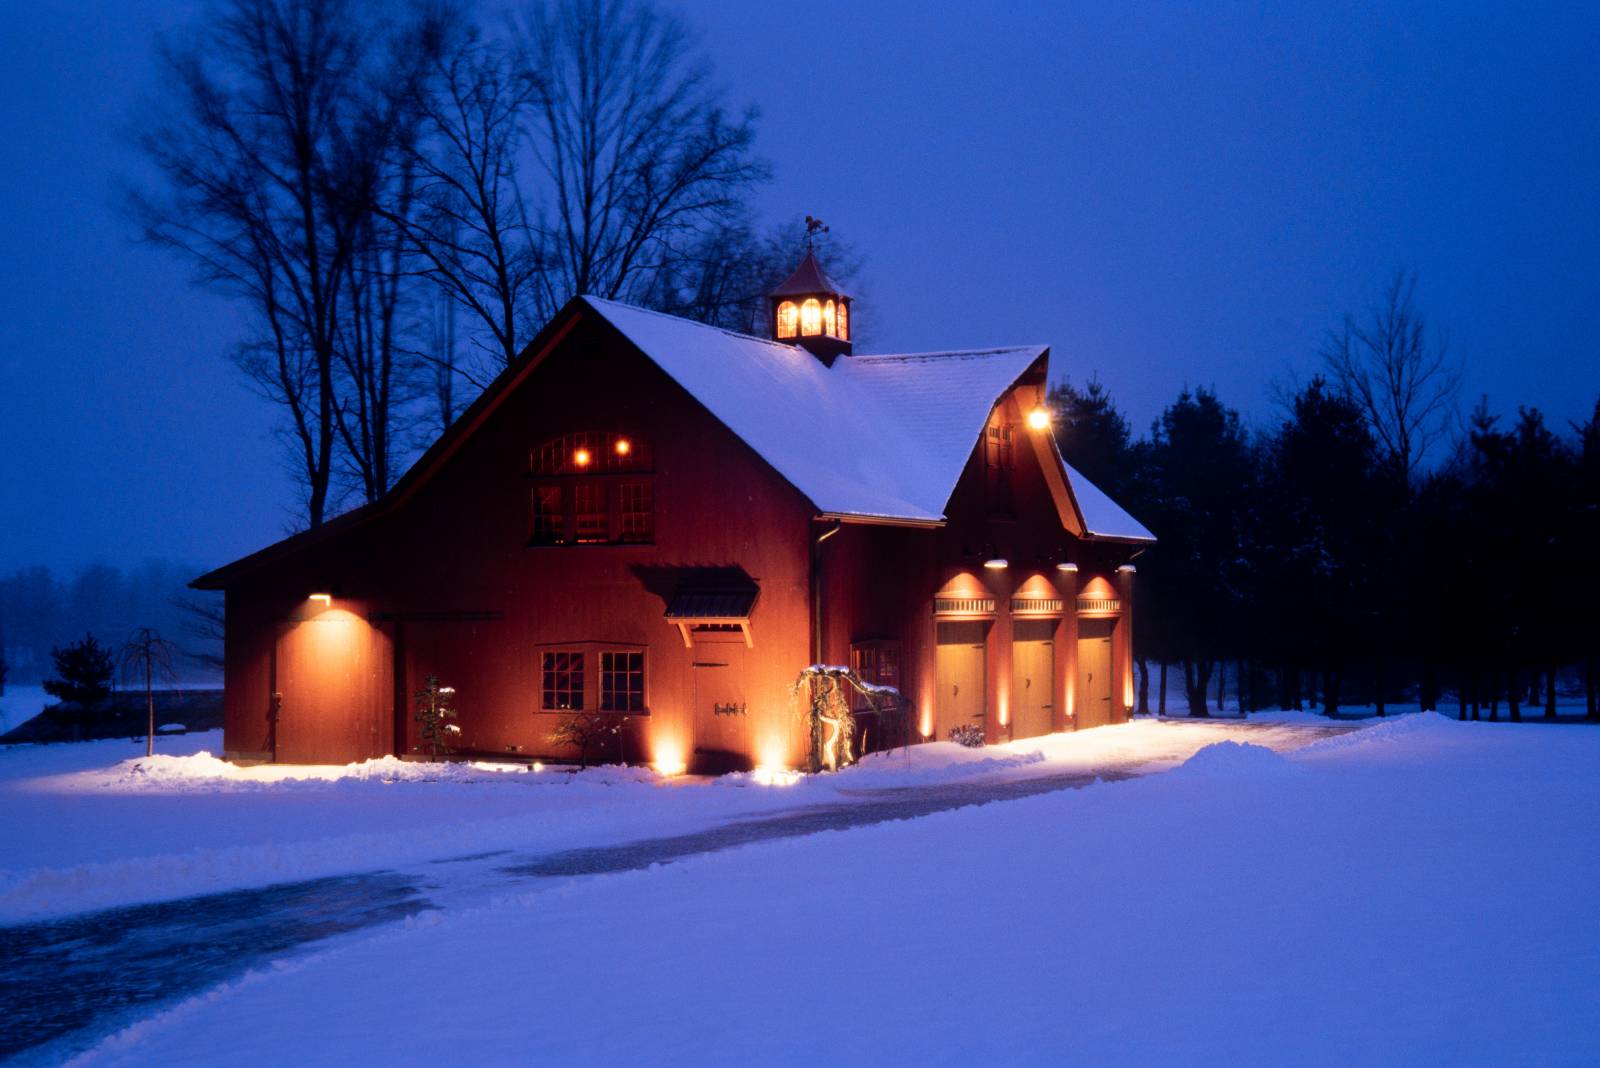 Shelter from the Storm • A Snowy 38' x 56' Carriage Barn in the Ellington CT Countryside